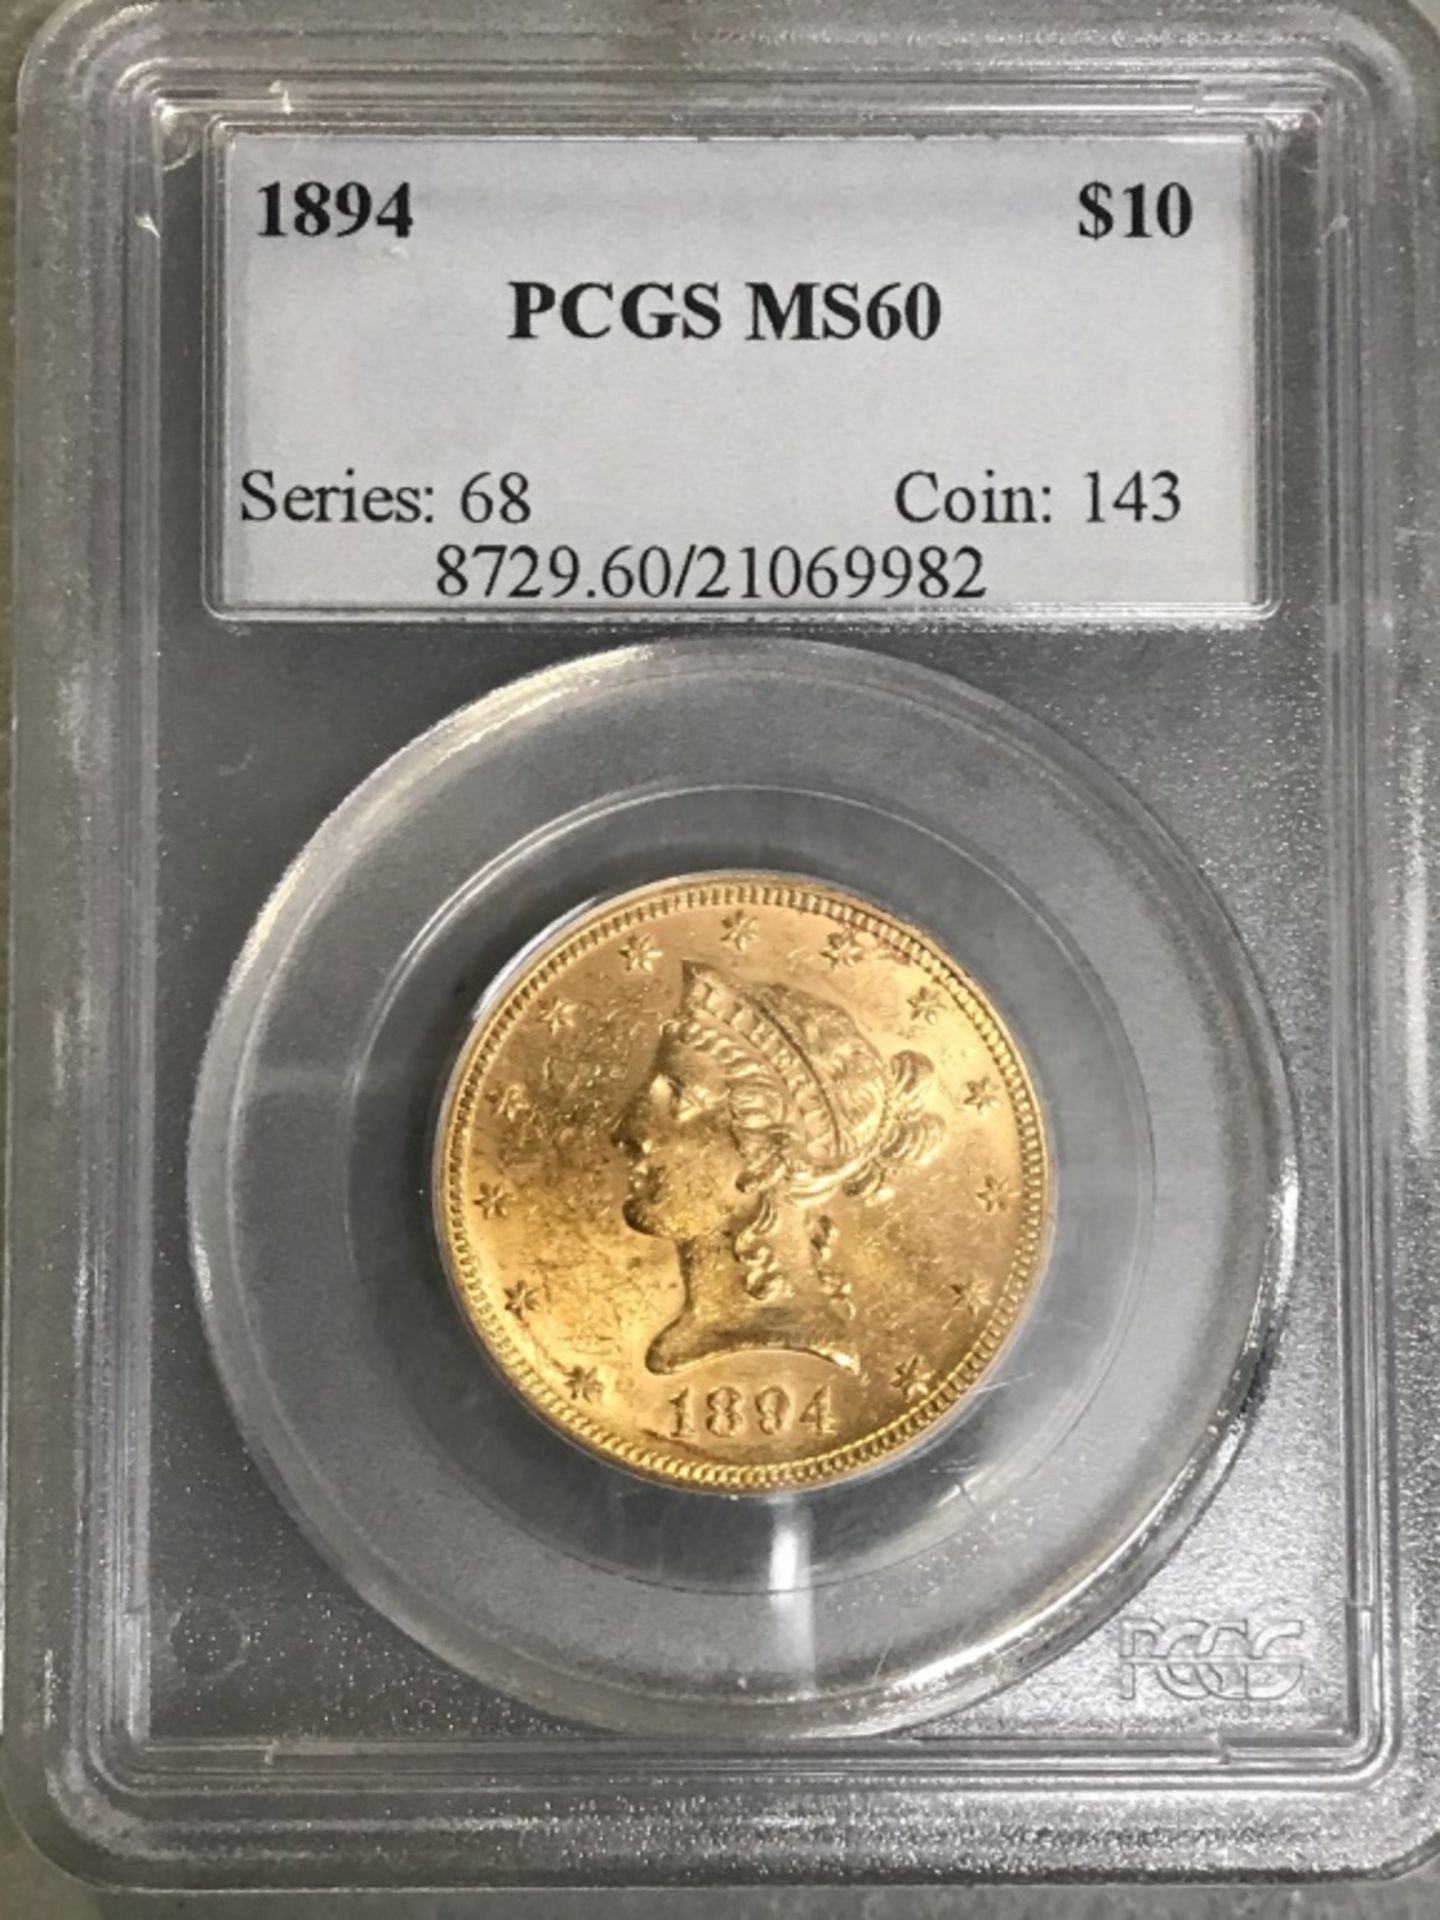 $10 US Gold MS 60 1894 - Image 4 of 9